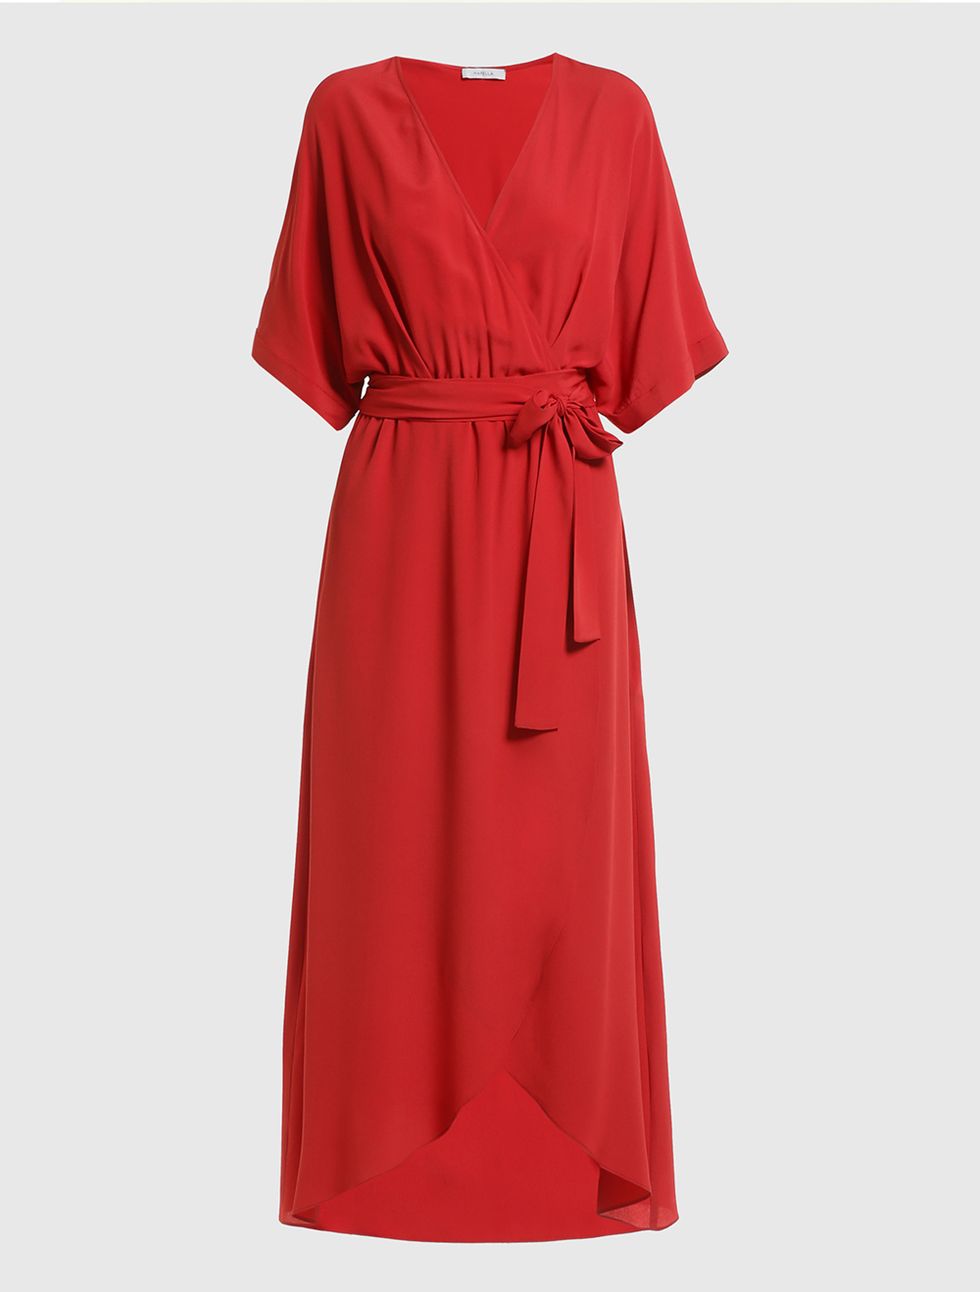 Clothing, Dress, Day dress, Red, Sleeve, Robe, Nightwear, Neck, Outerwear, Textile, 